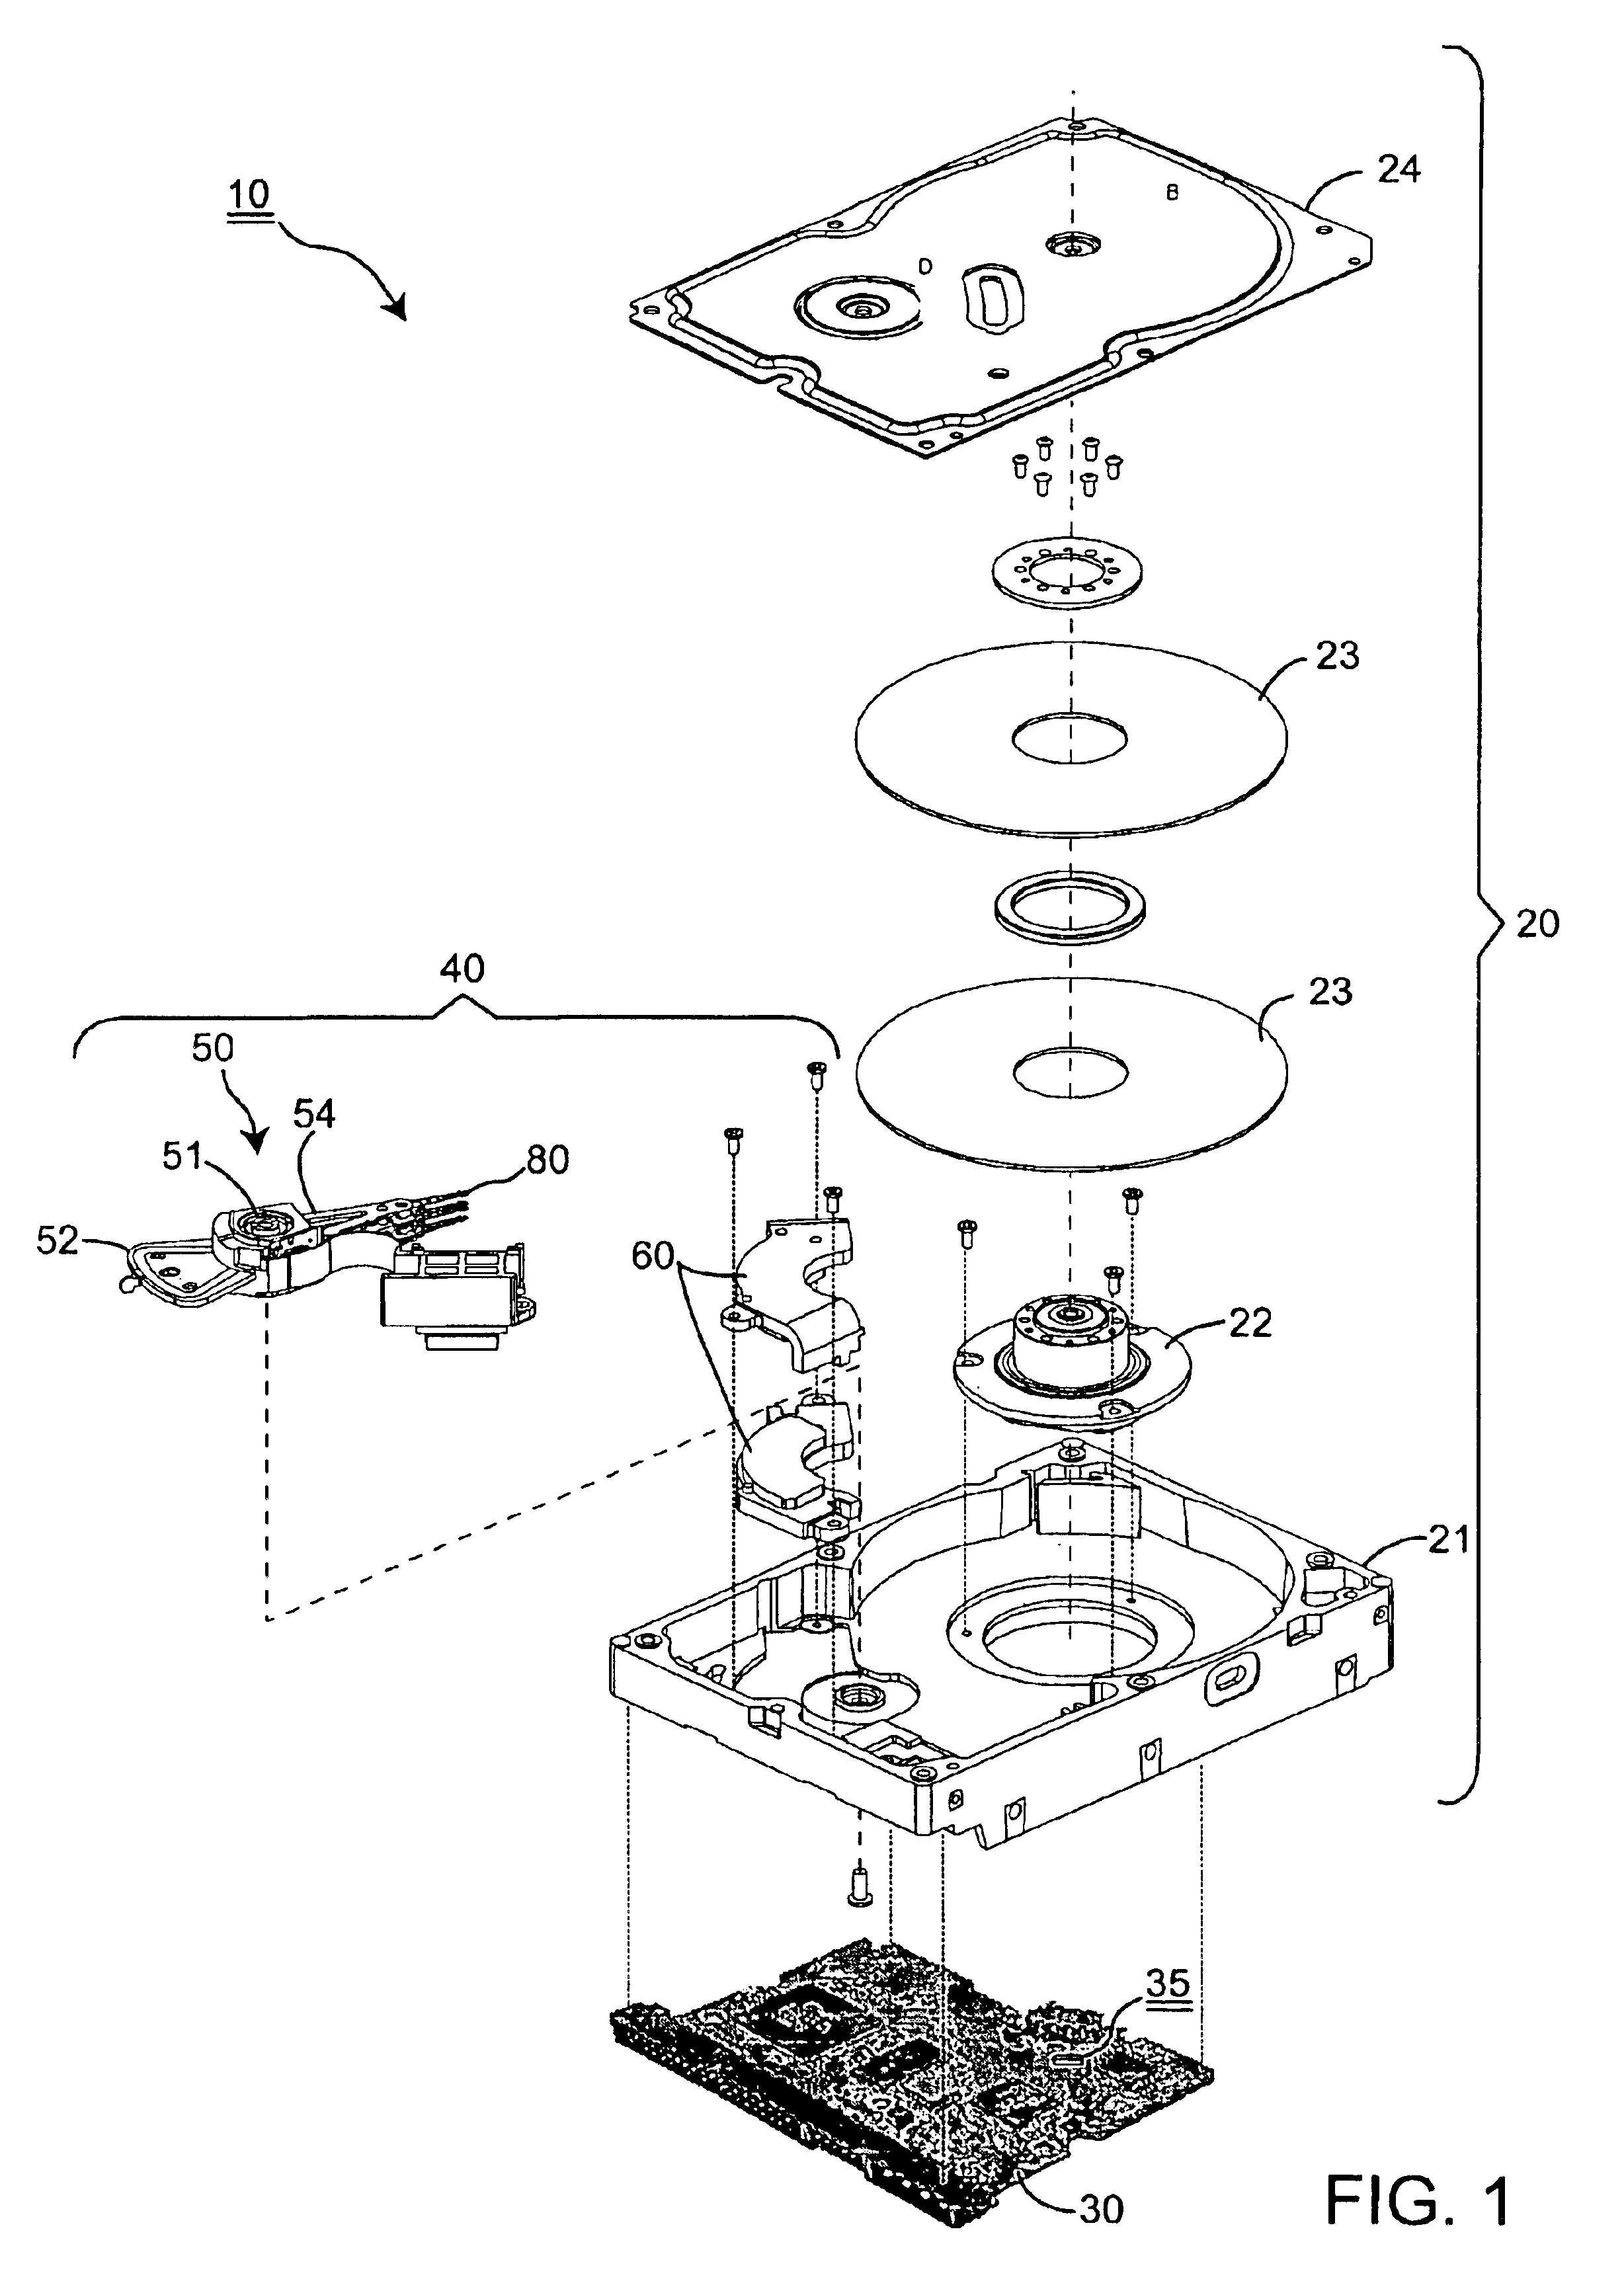 Vibration cancellation in a disk drive by using an acceleration sensor and adaptively adjusting its gain to minimize external acceleration effects